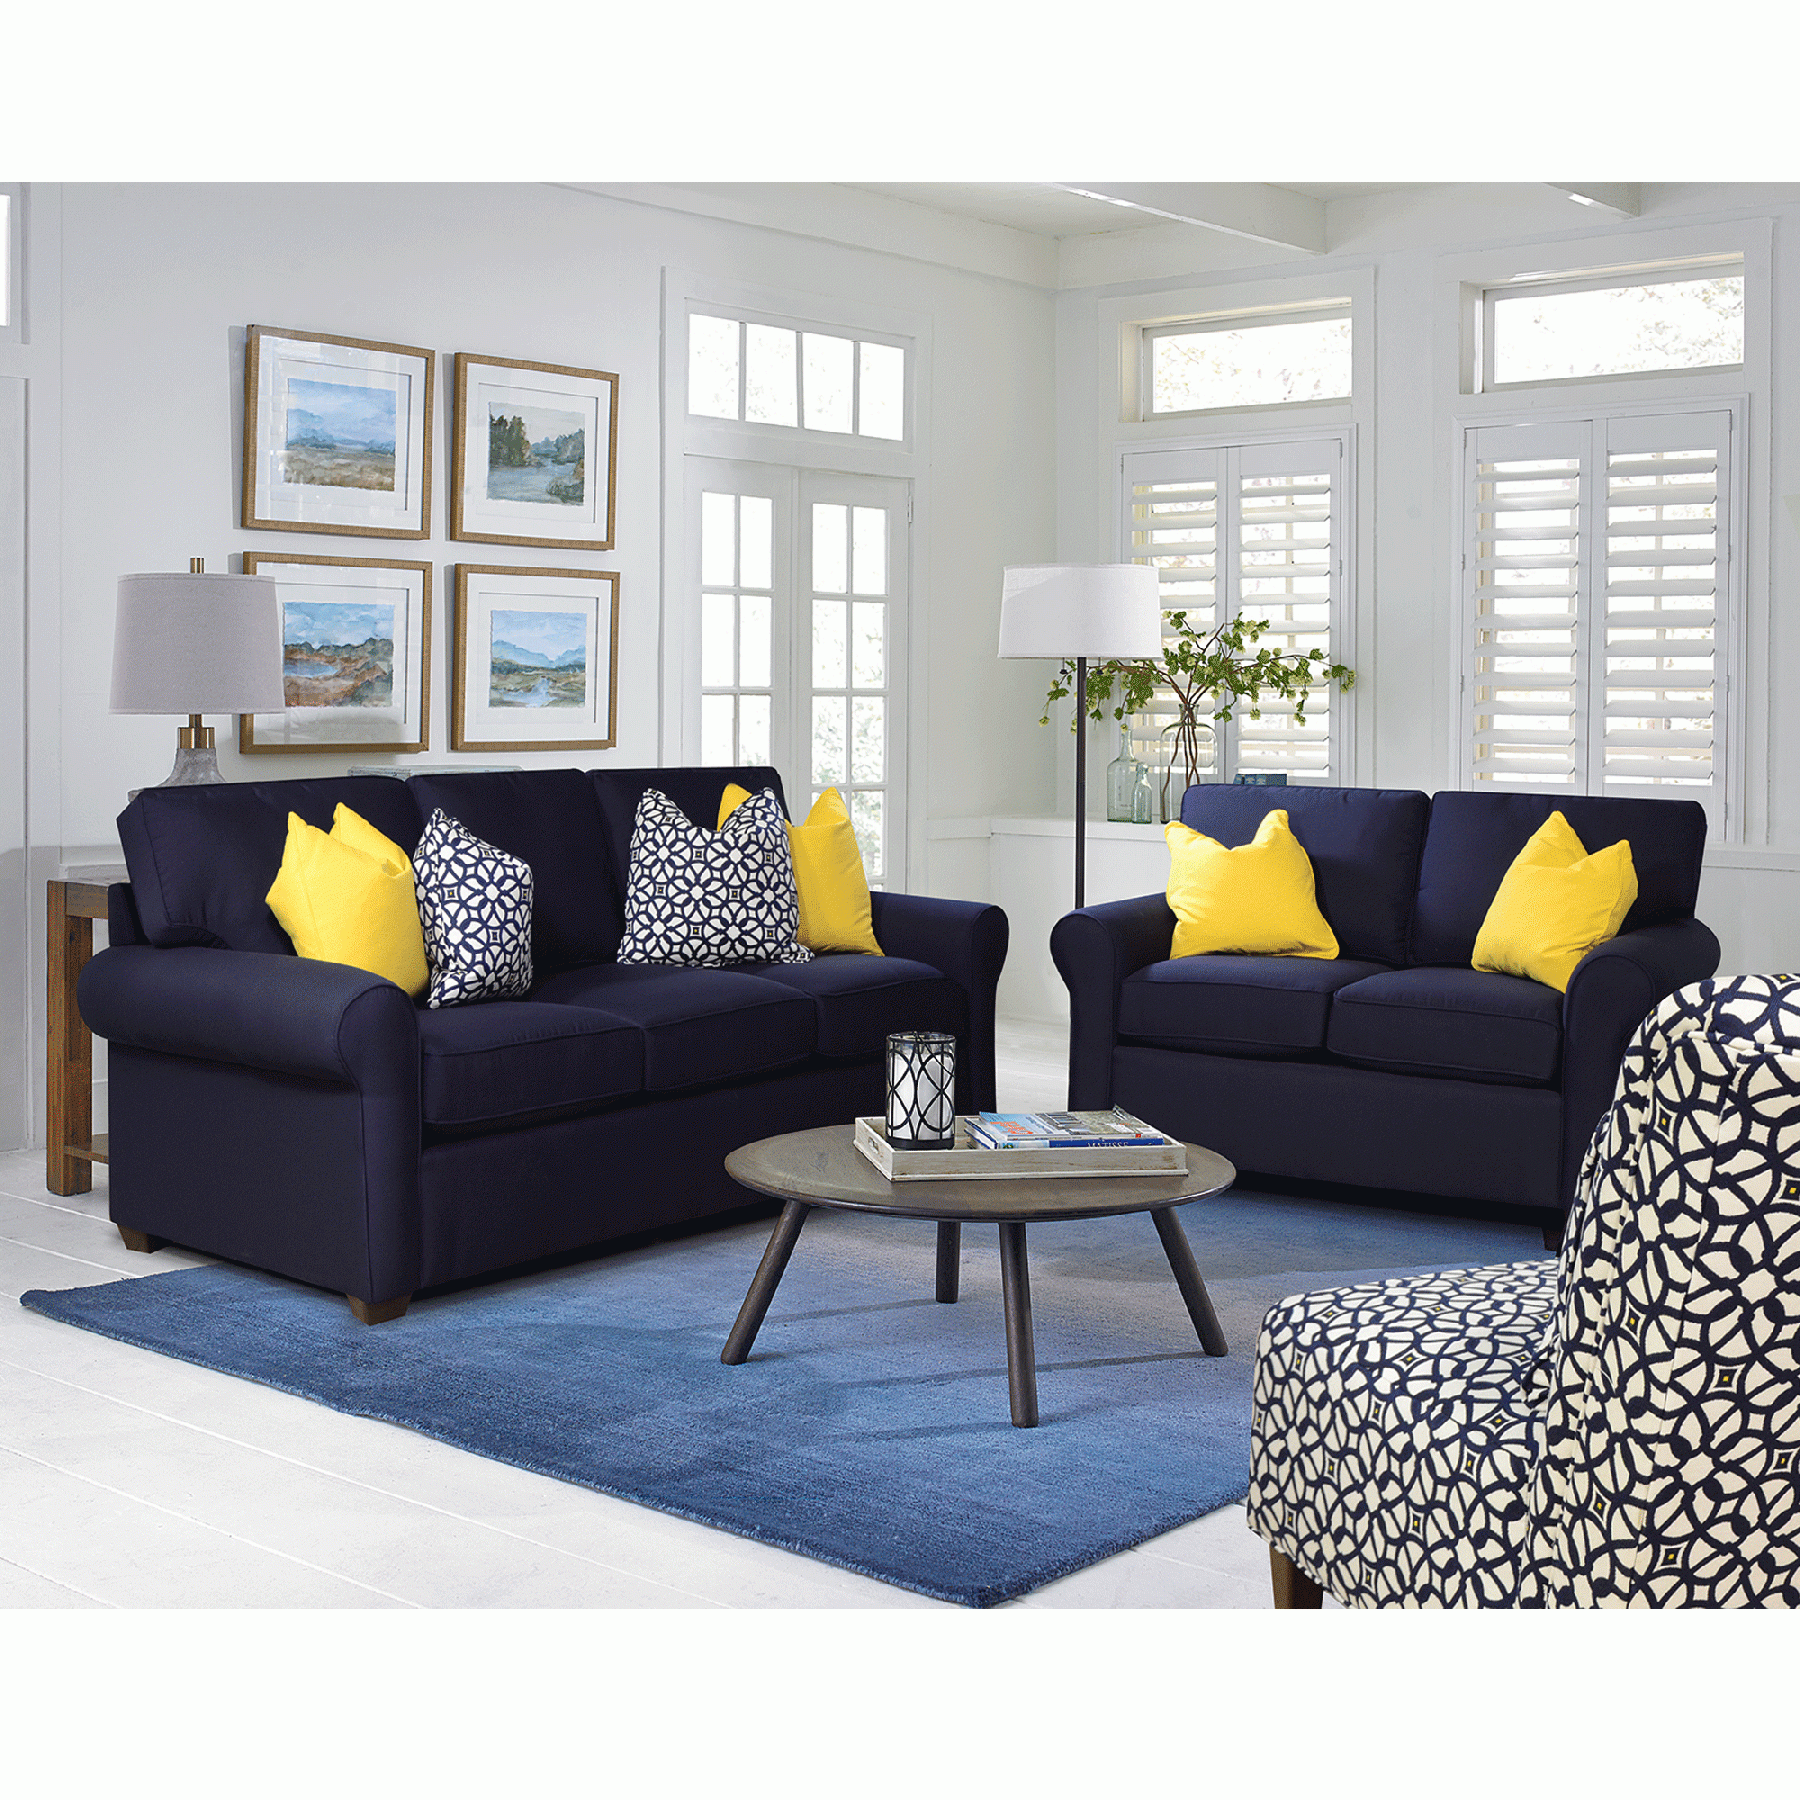 You'll Adore The Casual Comfort You'll Get From This Sunbrella Navy Throughout Navy Sleeper Sofa Couches (Gallery 5 of 20)